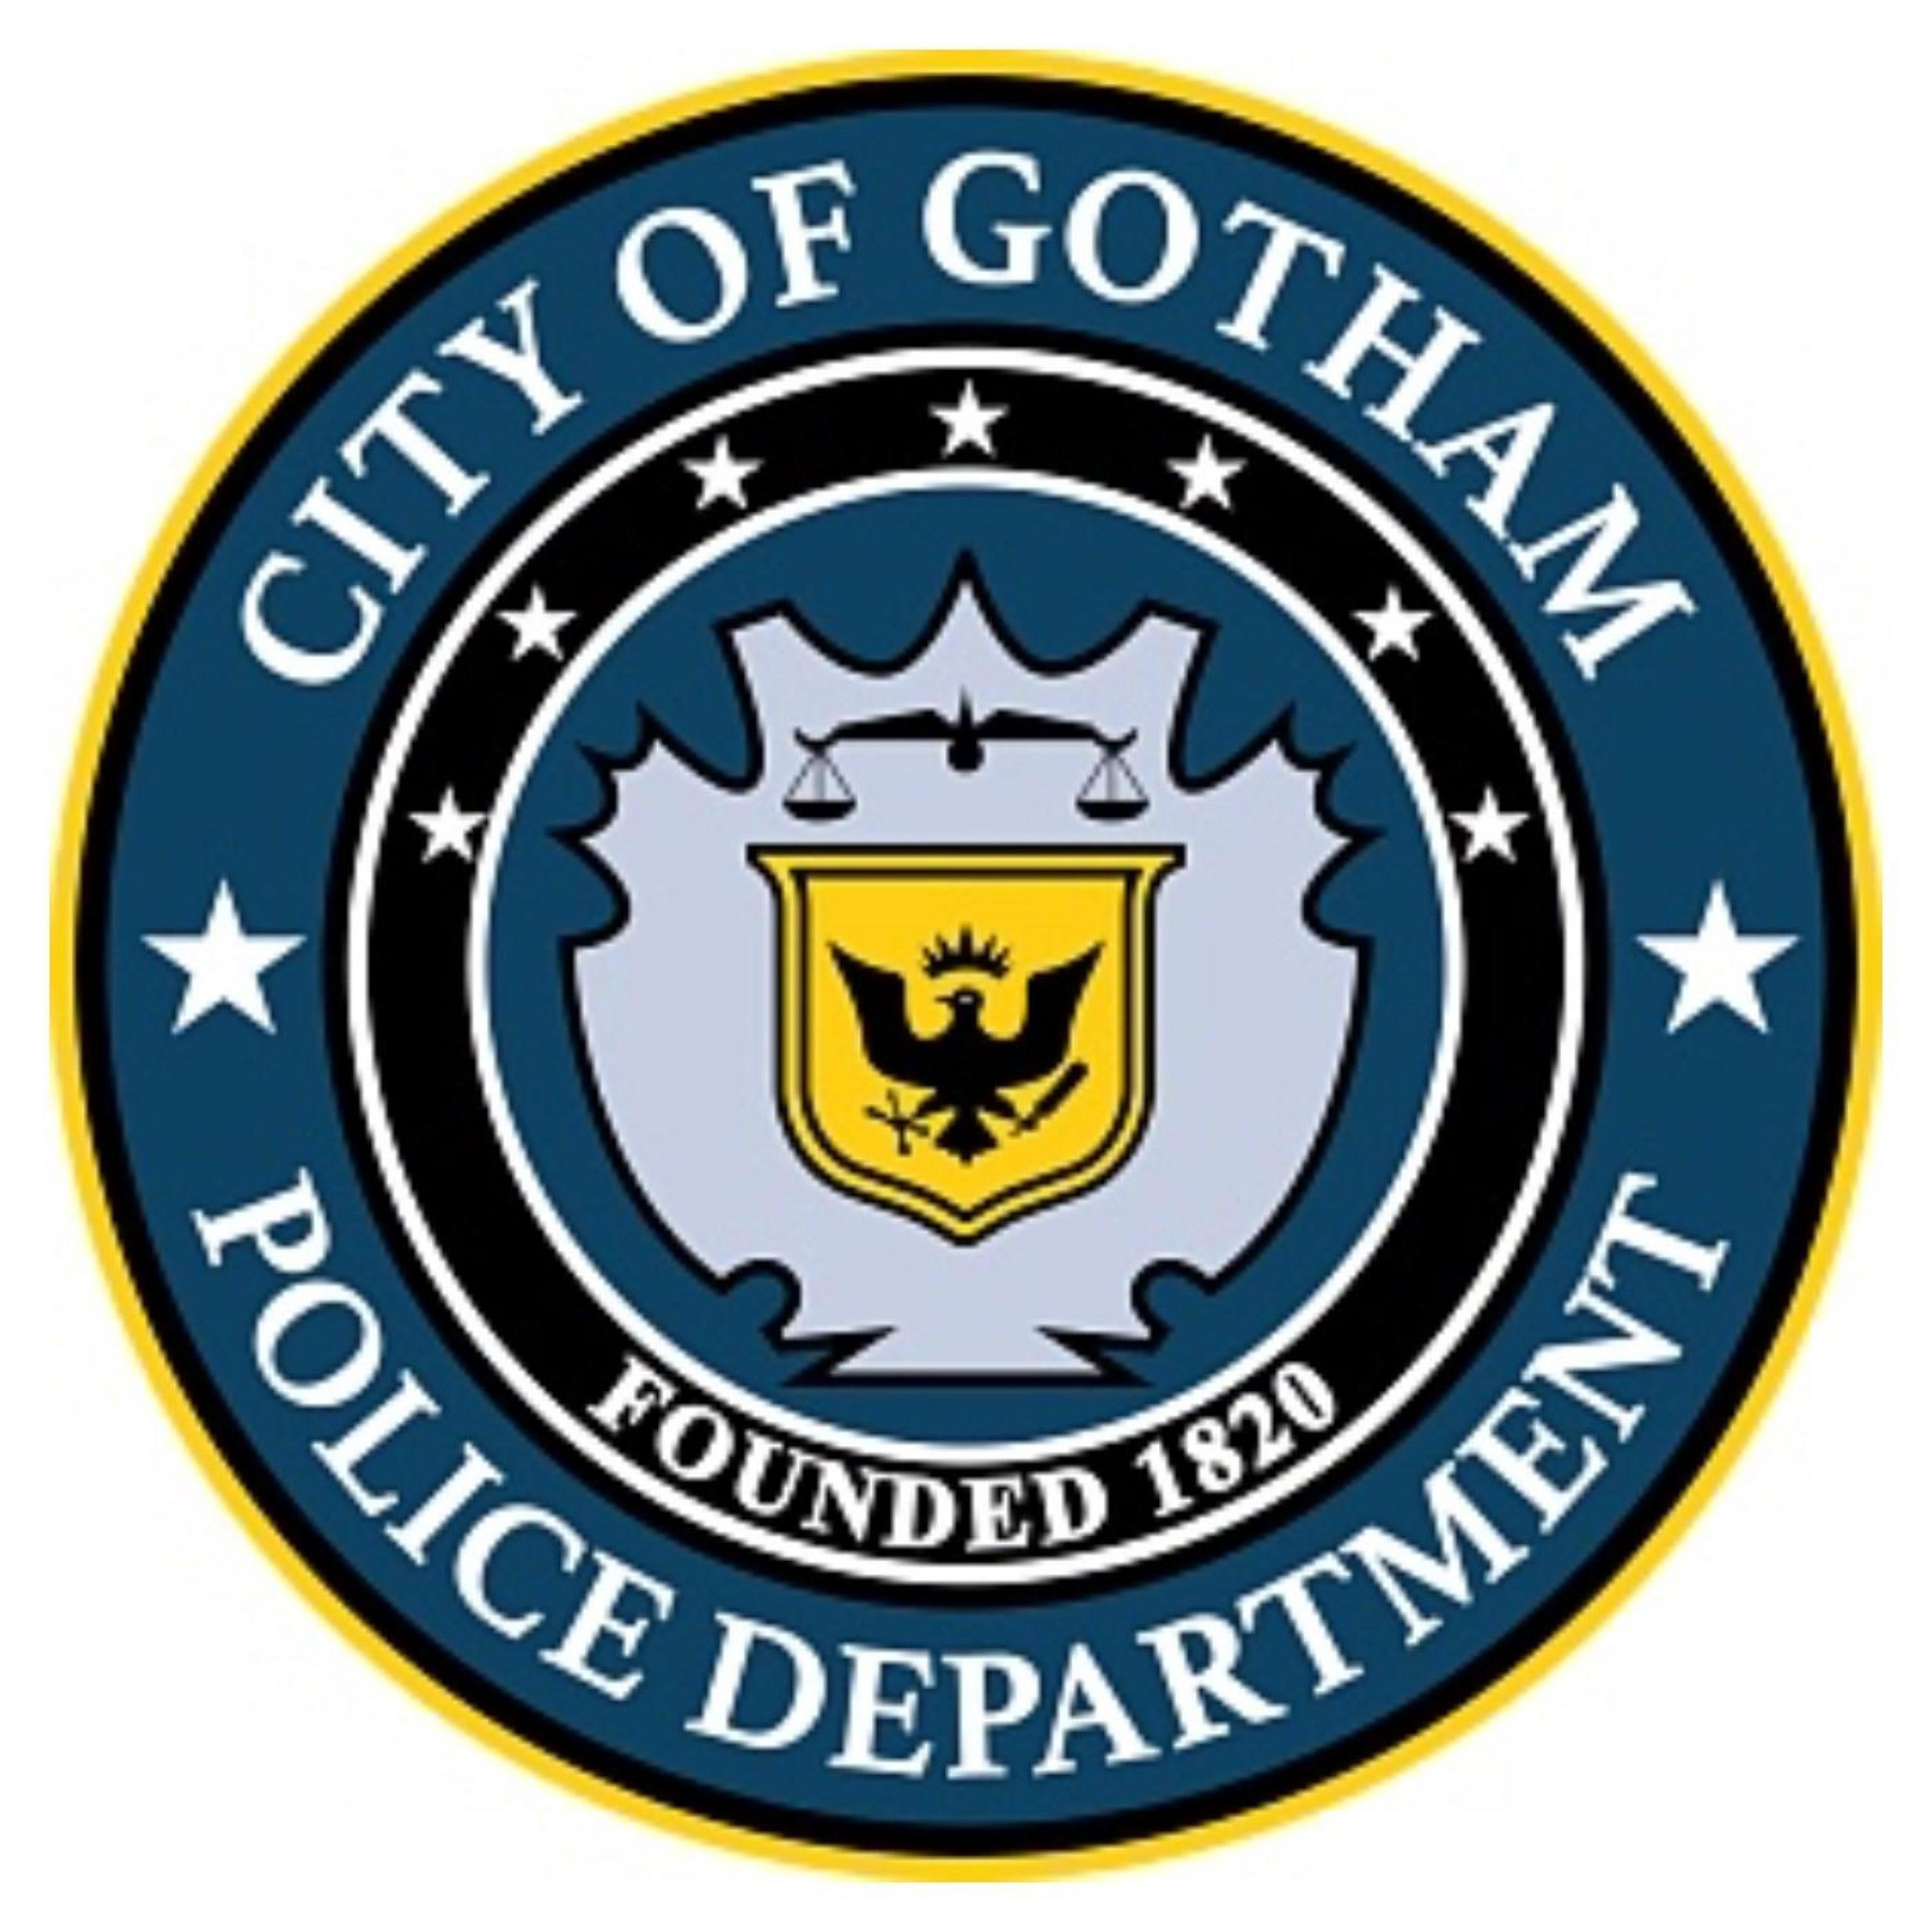 Gotham City PD: The crime alley podcast.